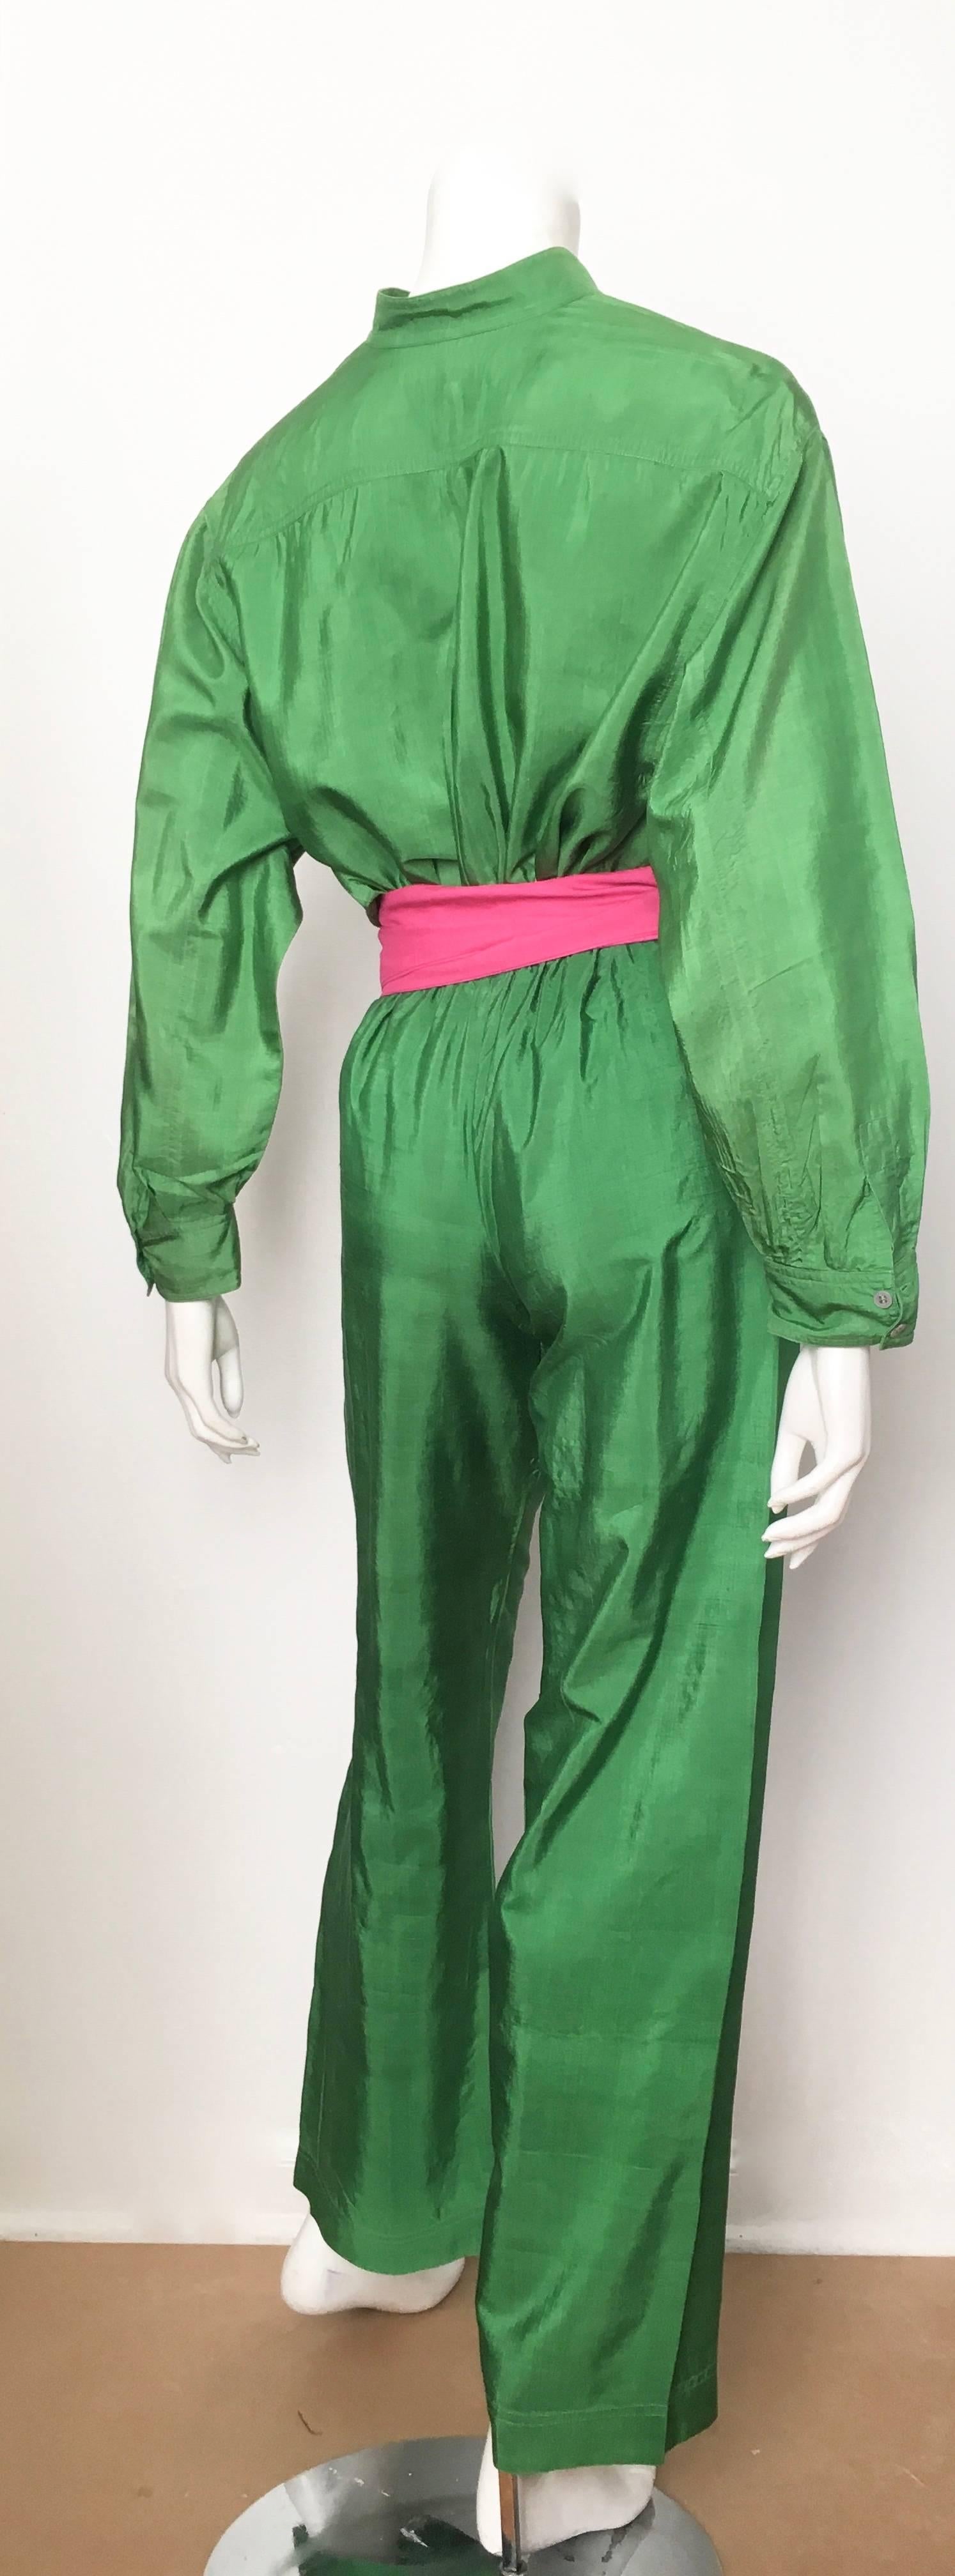 Saint Laurent Rive Gauche Green Silk Blouse, Pants & Sashes Size 4. In Excellent Condition For Sale In Atlanta, GA